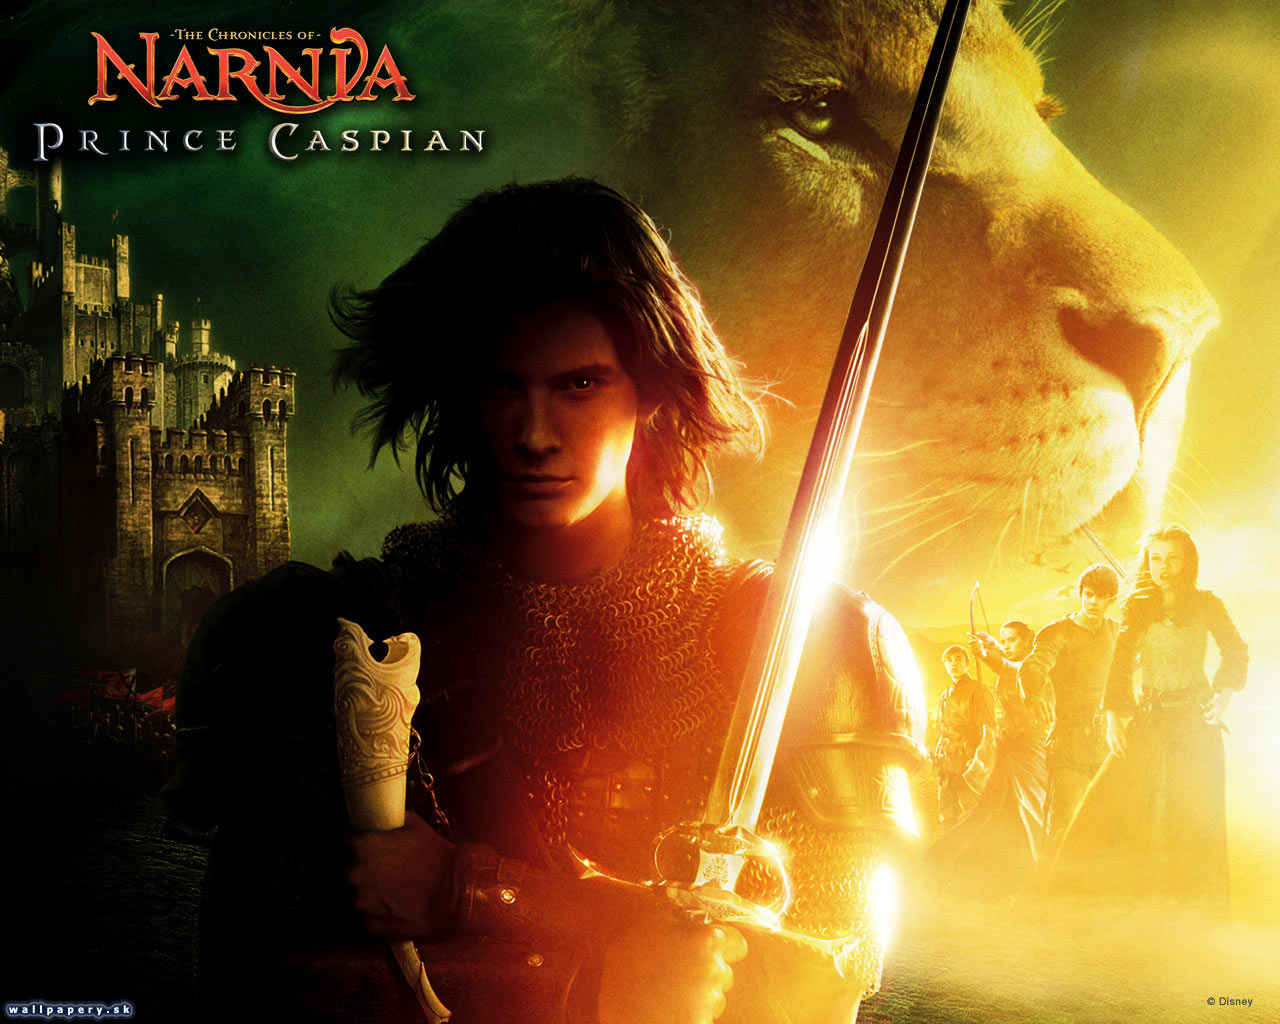 The Chronicles of Narnia: Prince Caspian - wallpaper 1